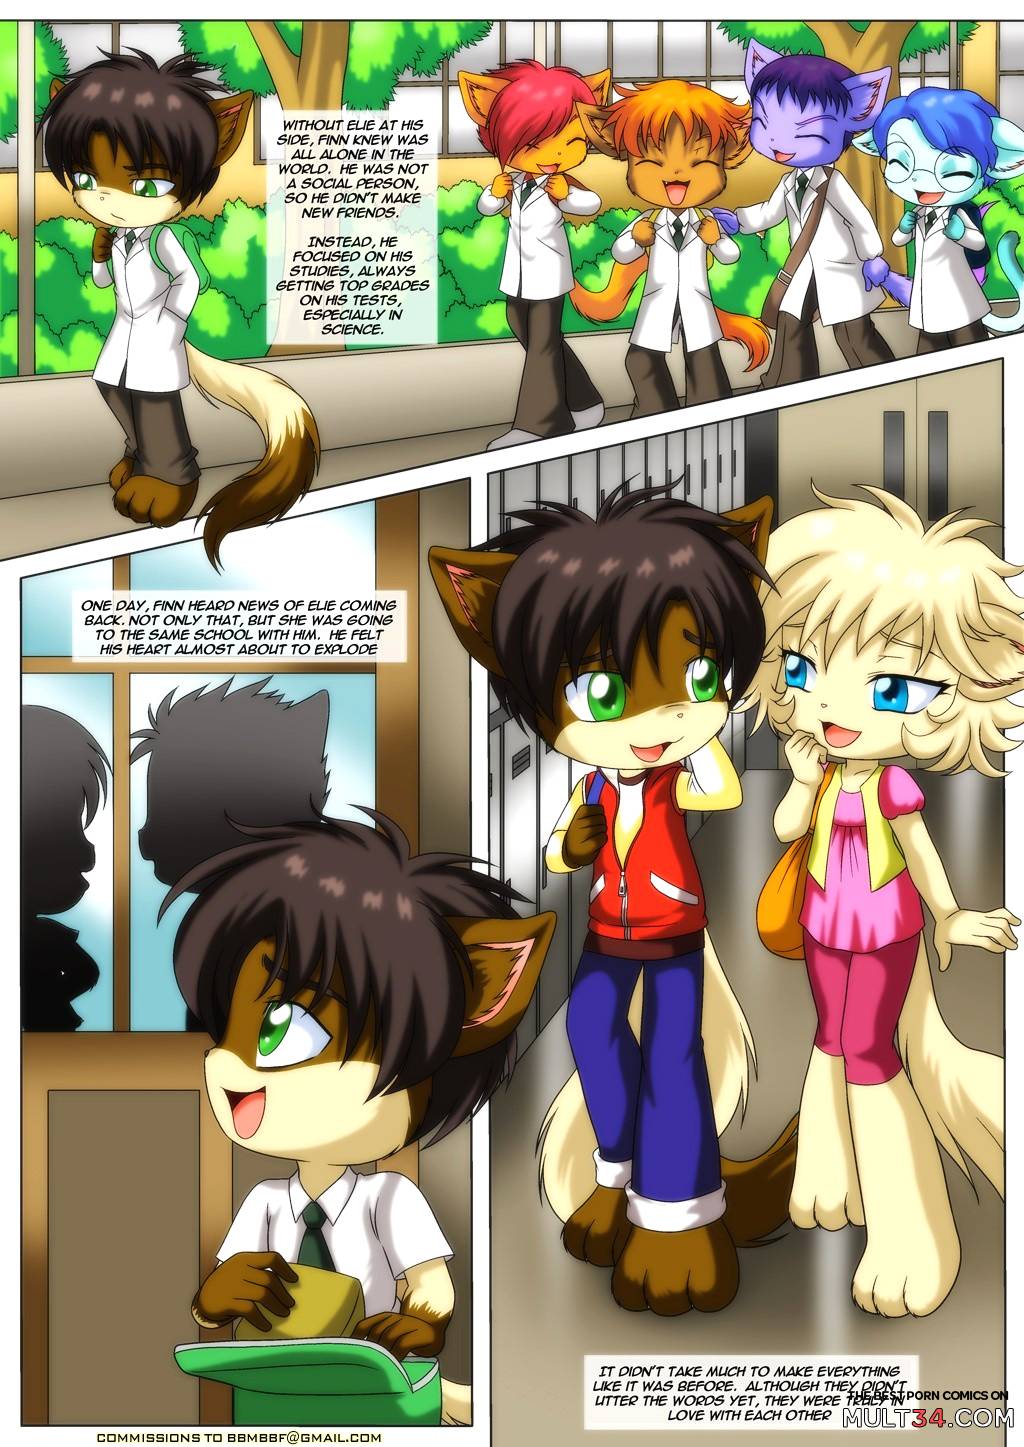 Little Tails 6: Missing The Light of The Day page 7